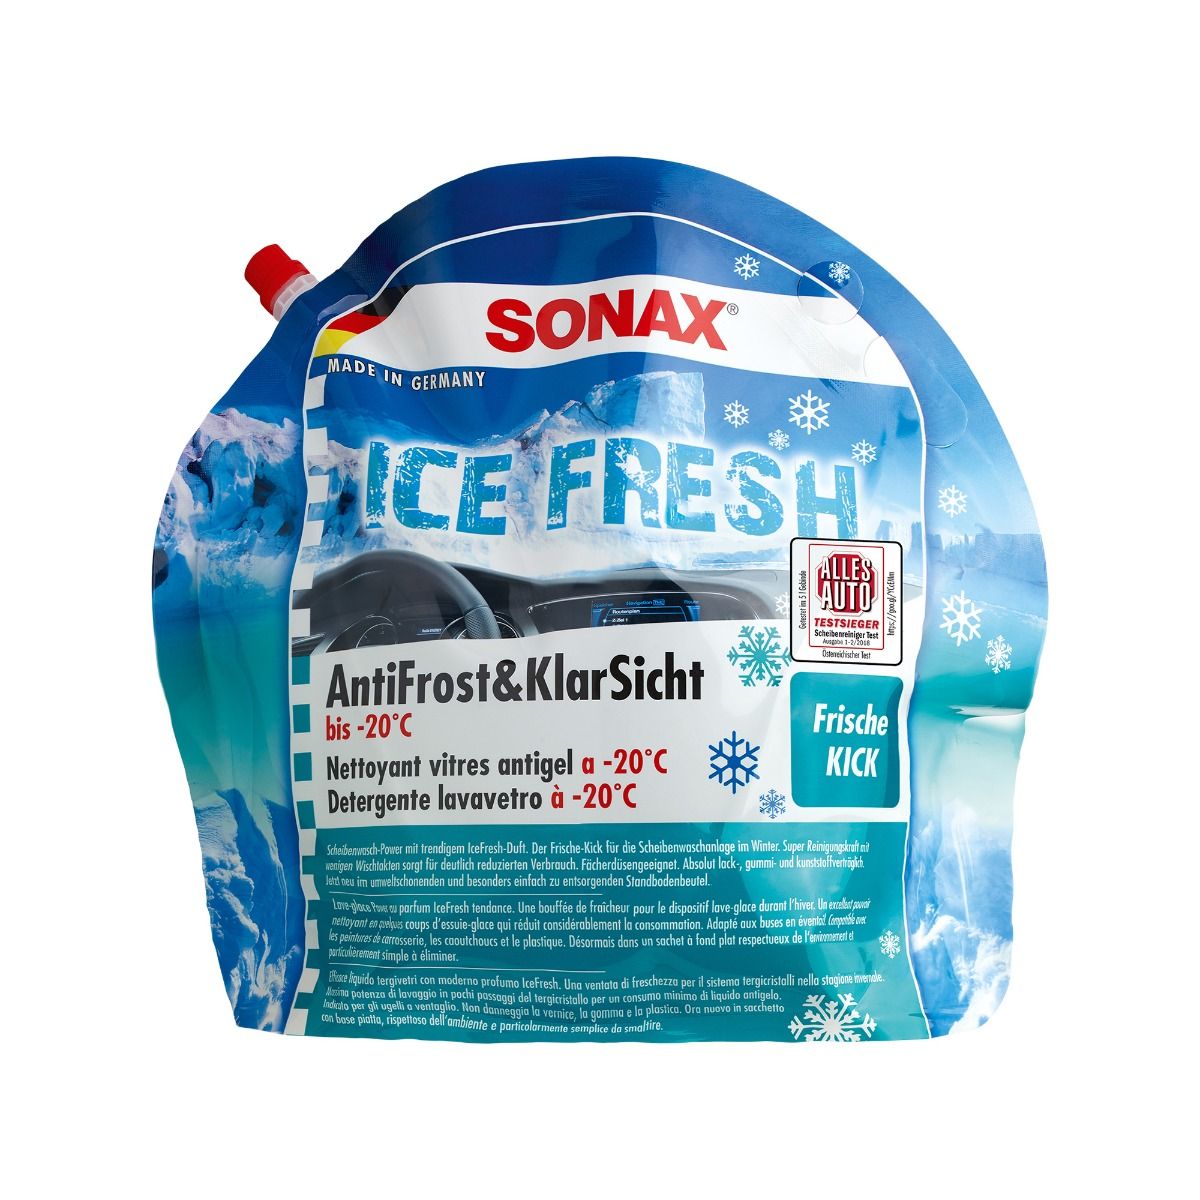 Sonax AntiFrost&KlarSicht IceFresh Screen Antifreeze up to -20°C ready for  use 3 L